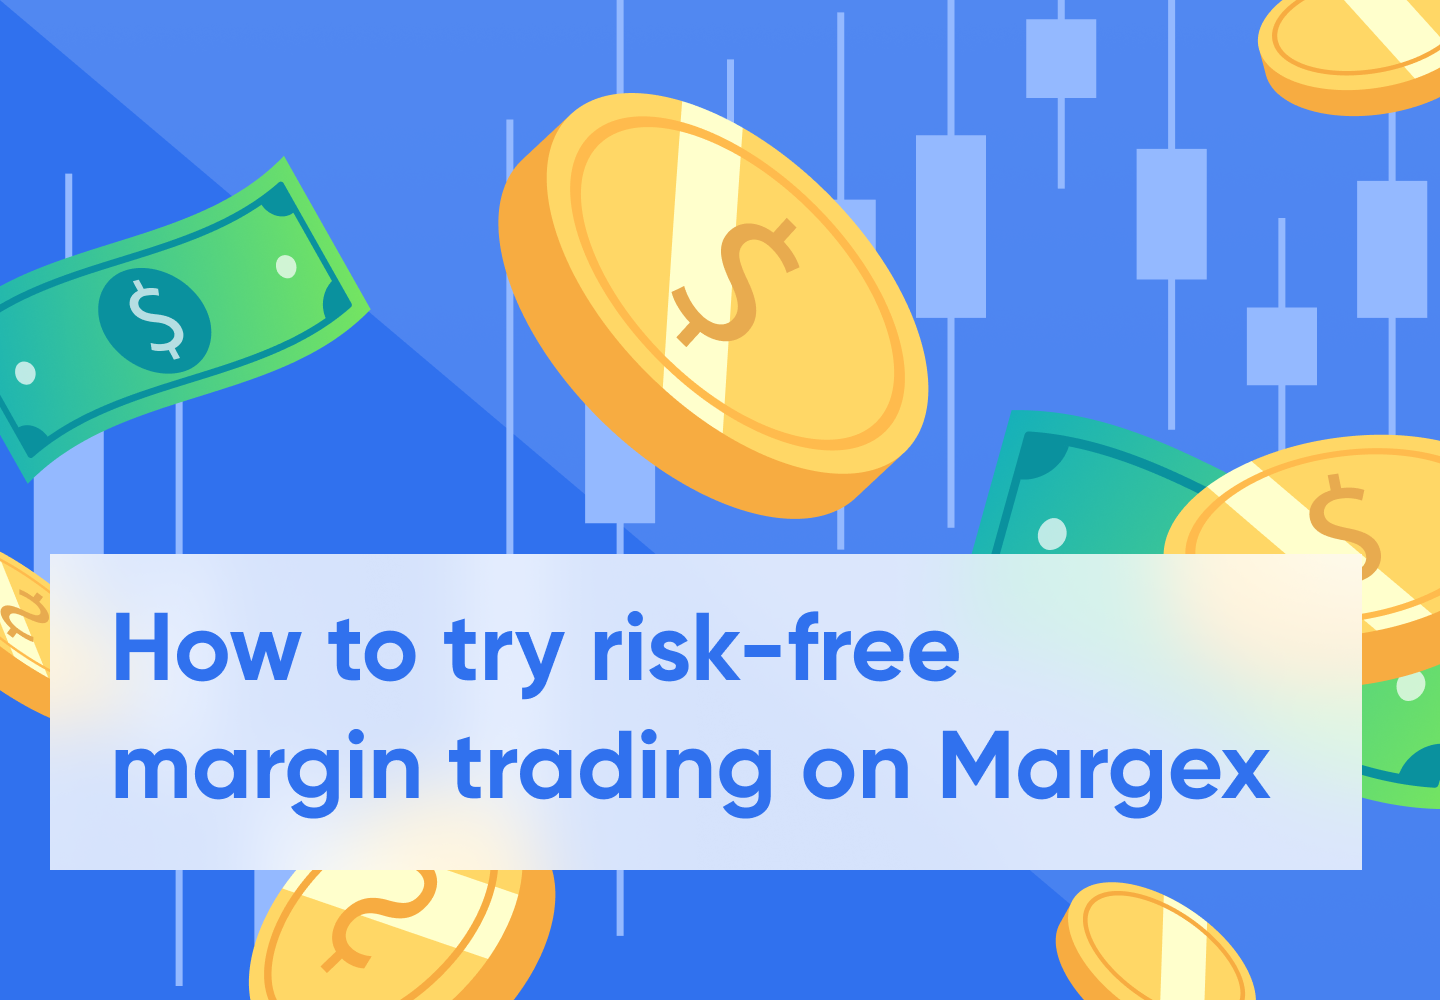 How To Try Risk-Free Margin Trading With Up To 100x Leverage On Margex